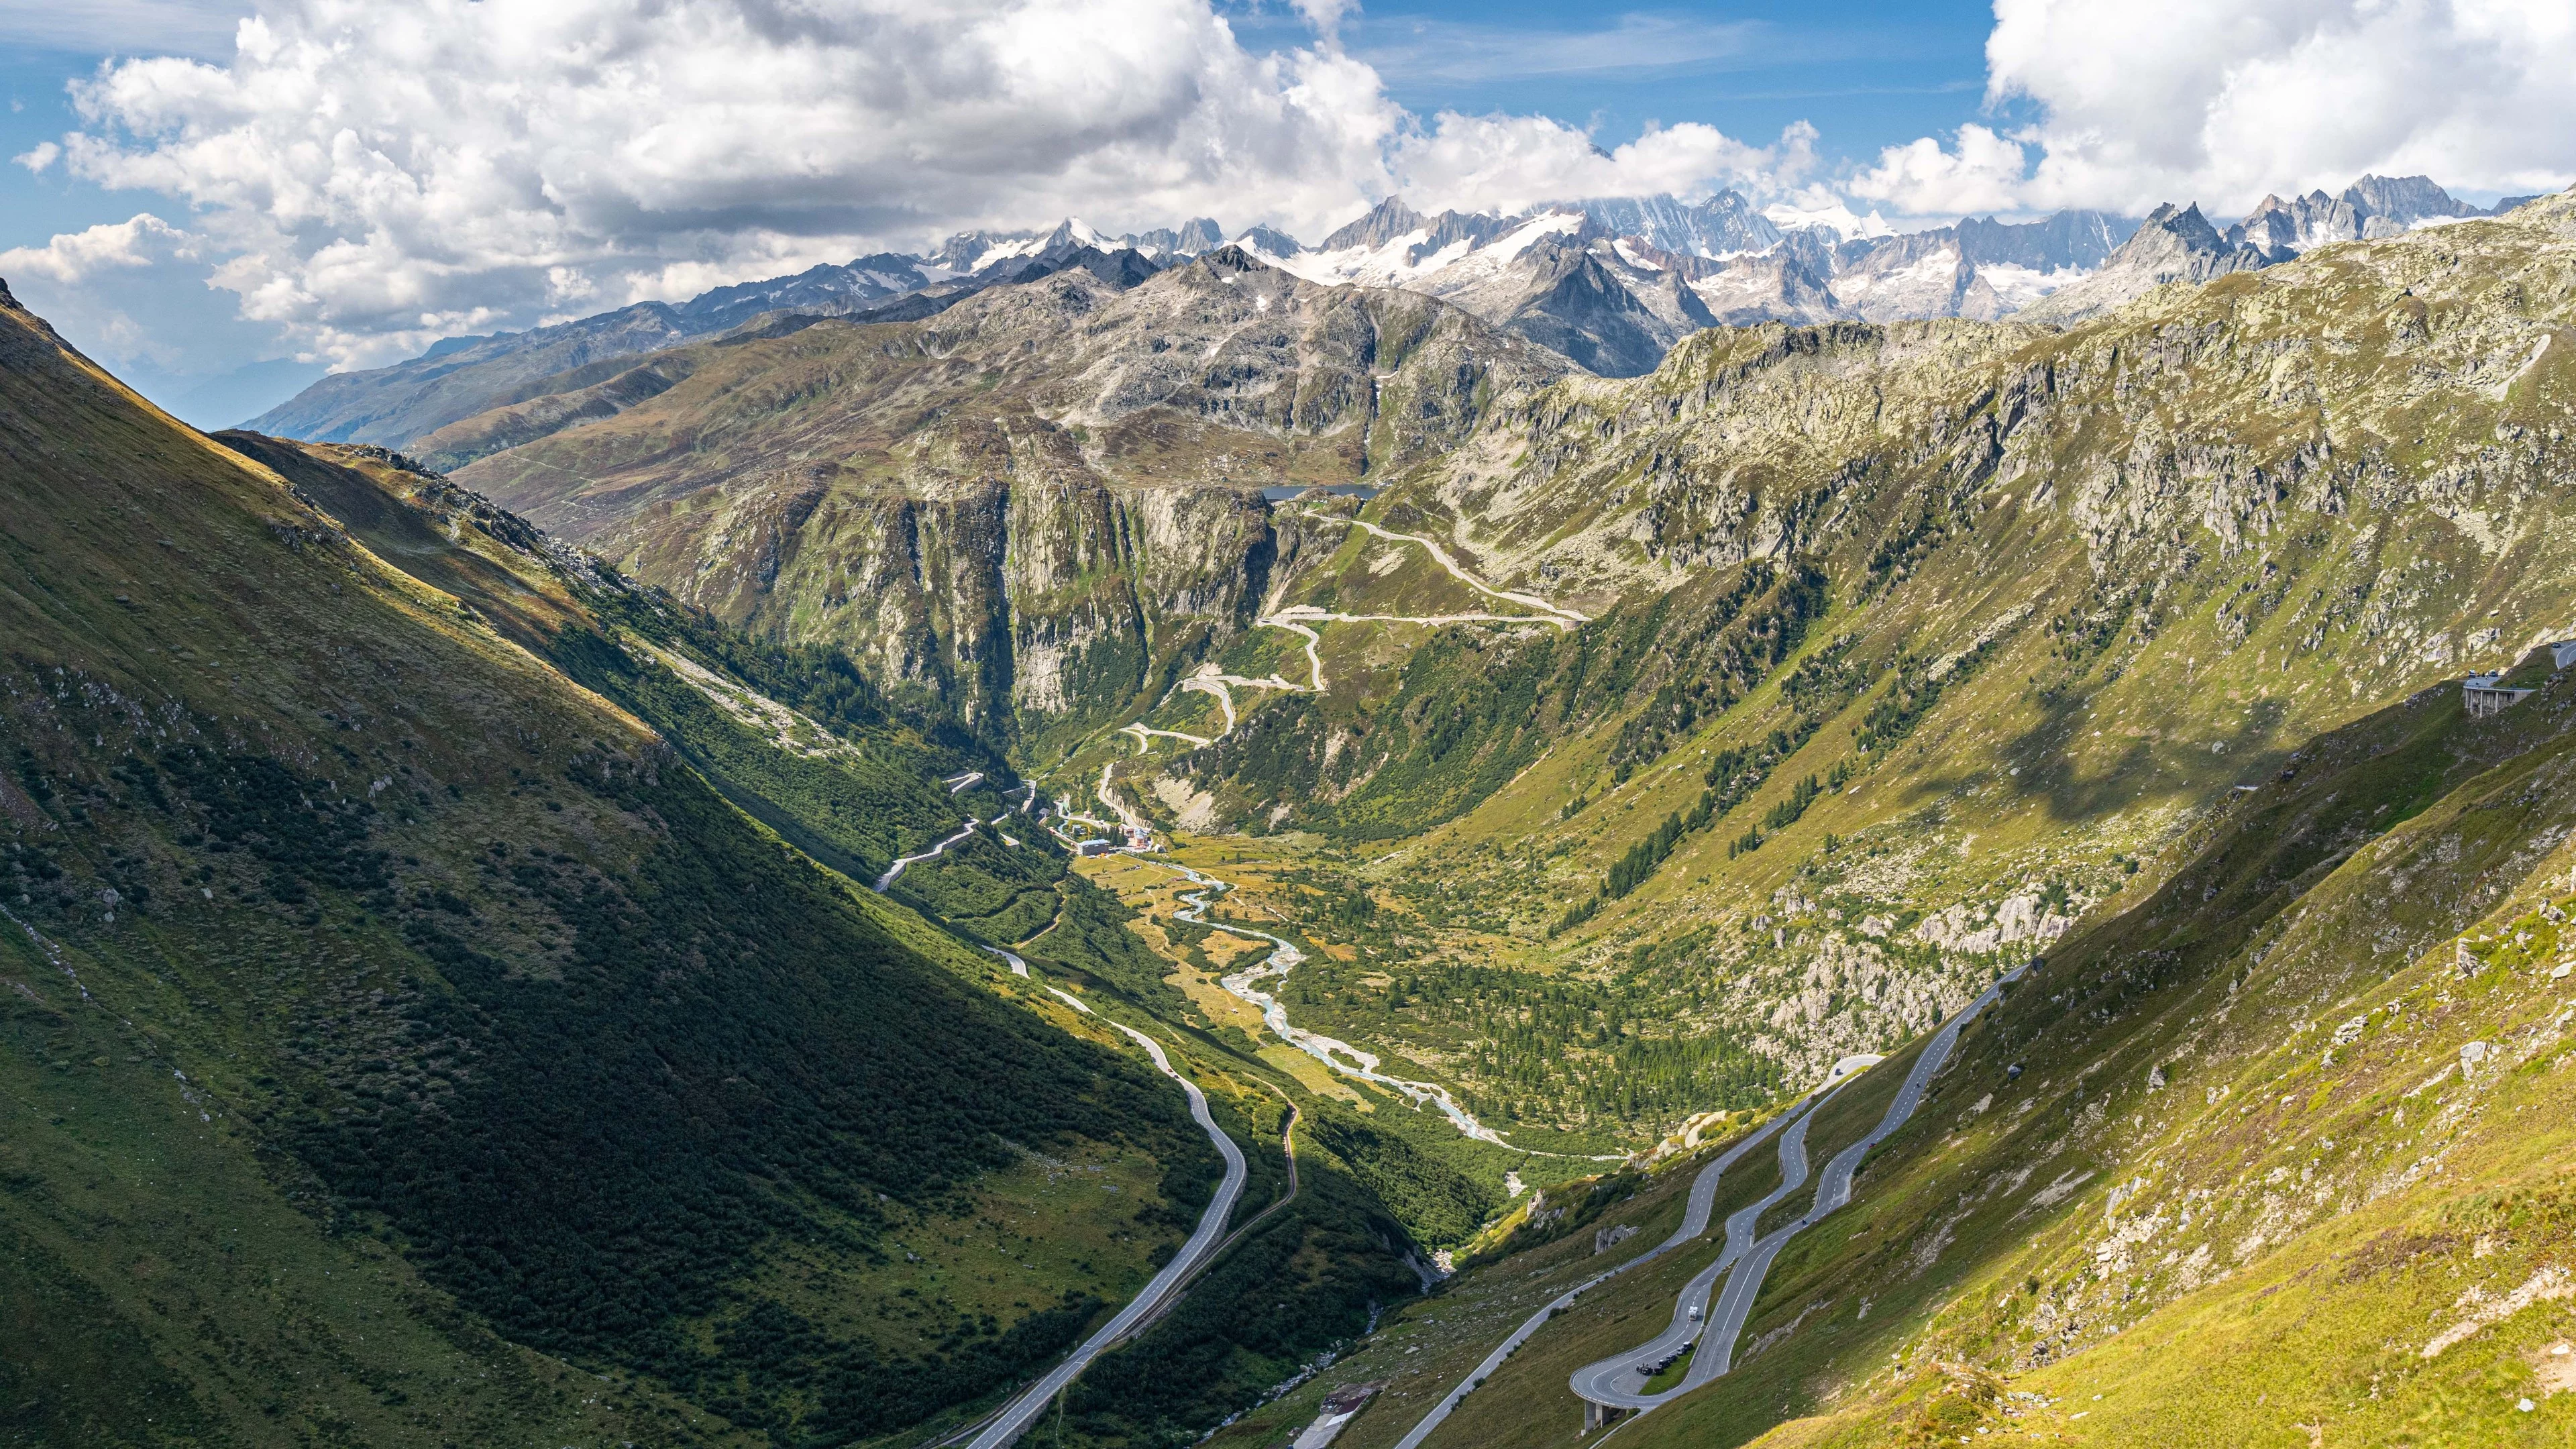 Aerial view of the Furka Pass in Switzerland